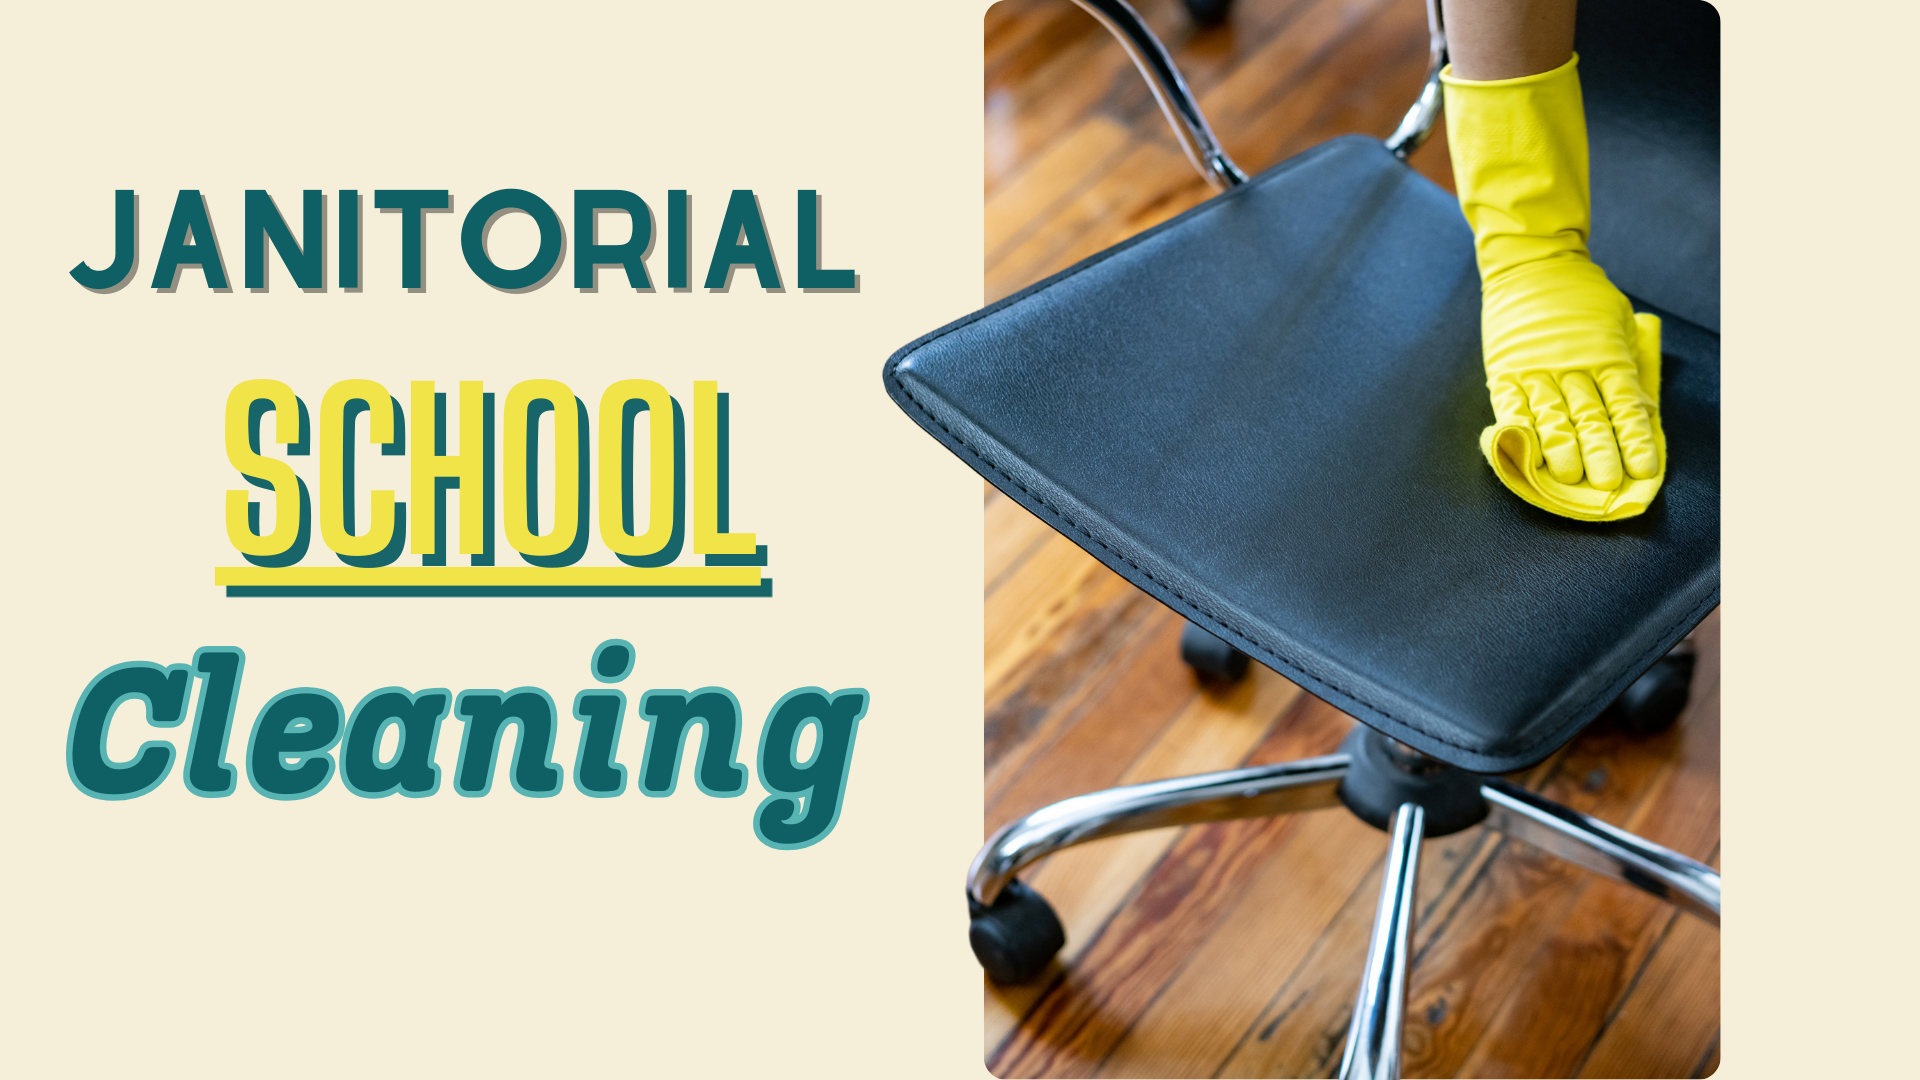 Seasonal Janitorial School Cleaning: Adapting Your Routine for Year-Round Cleanliness